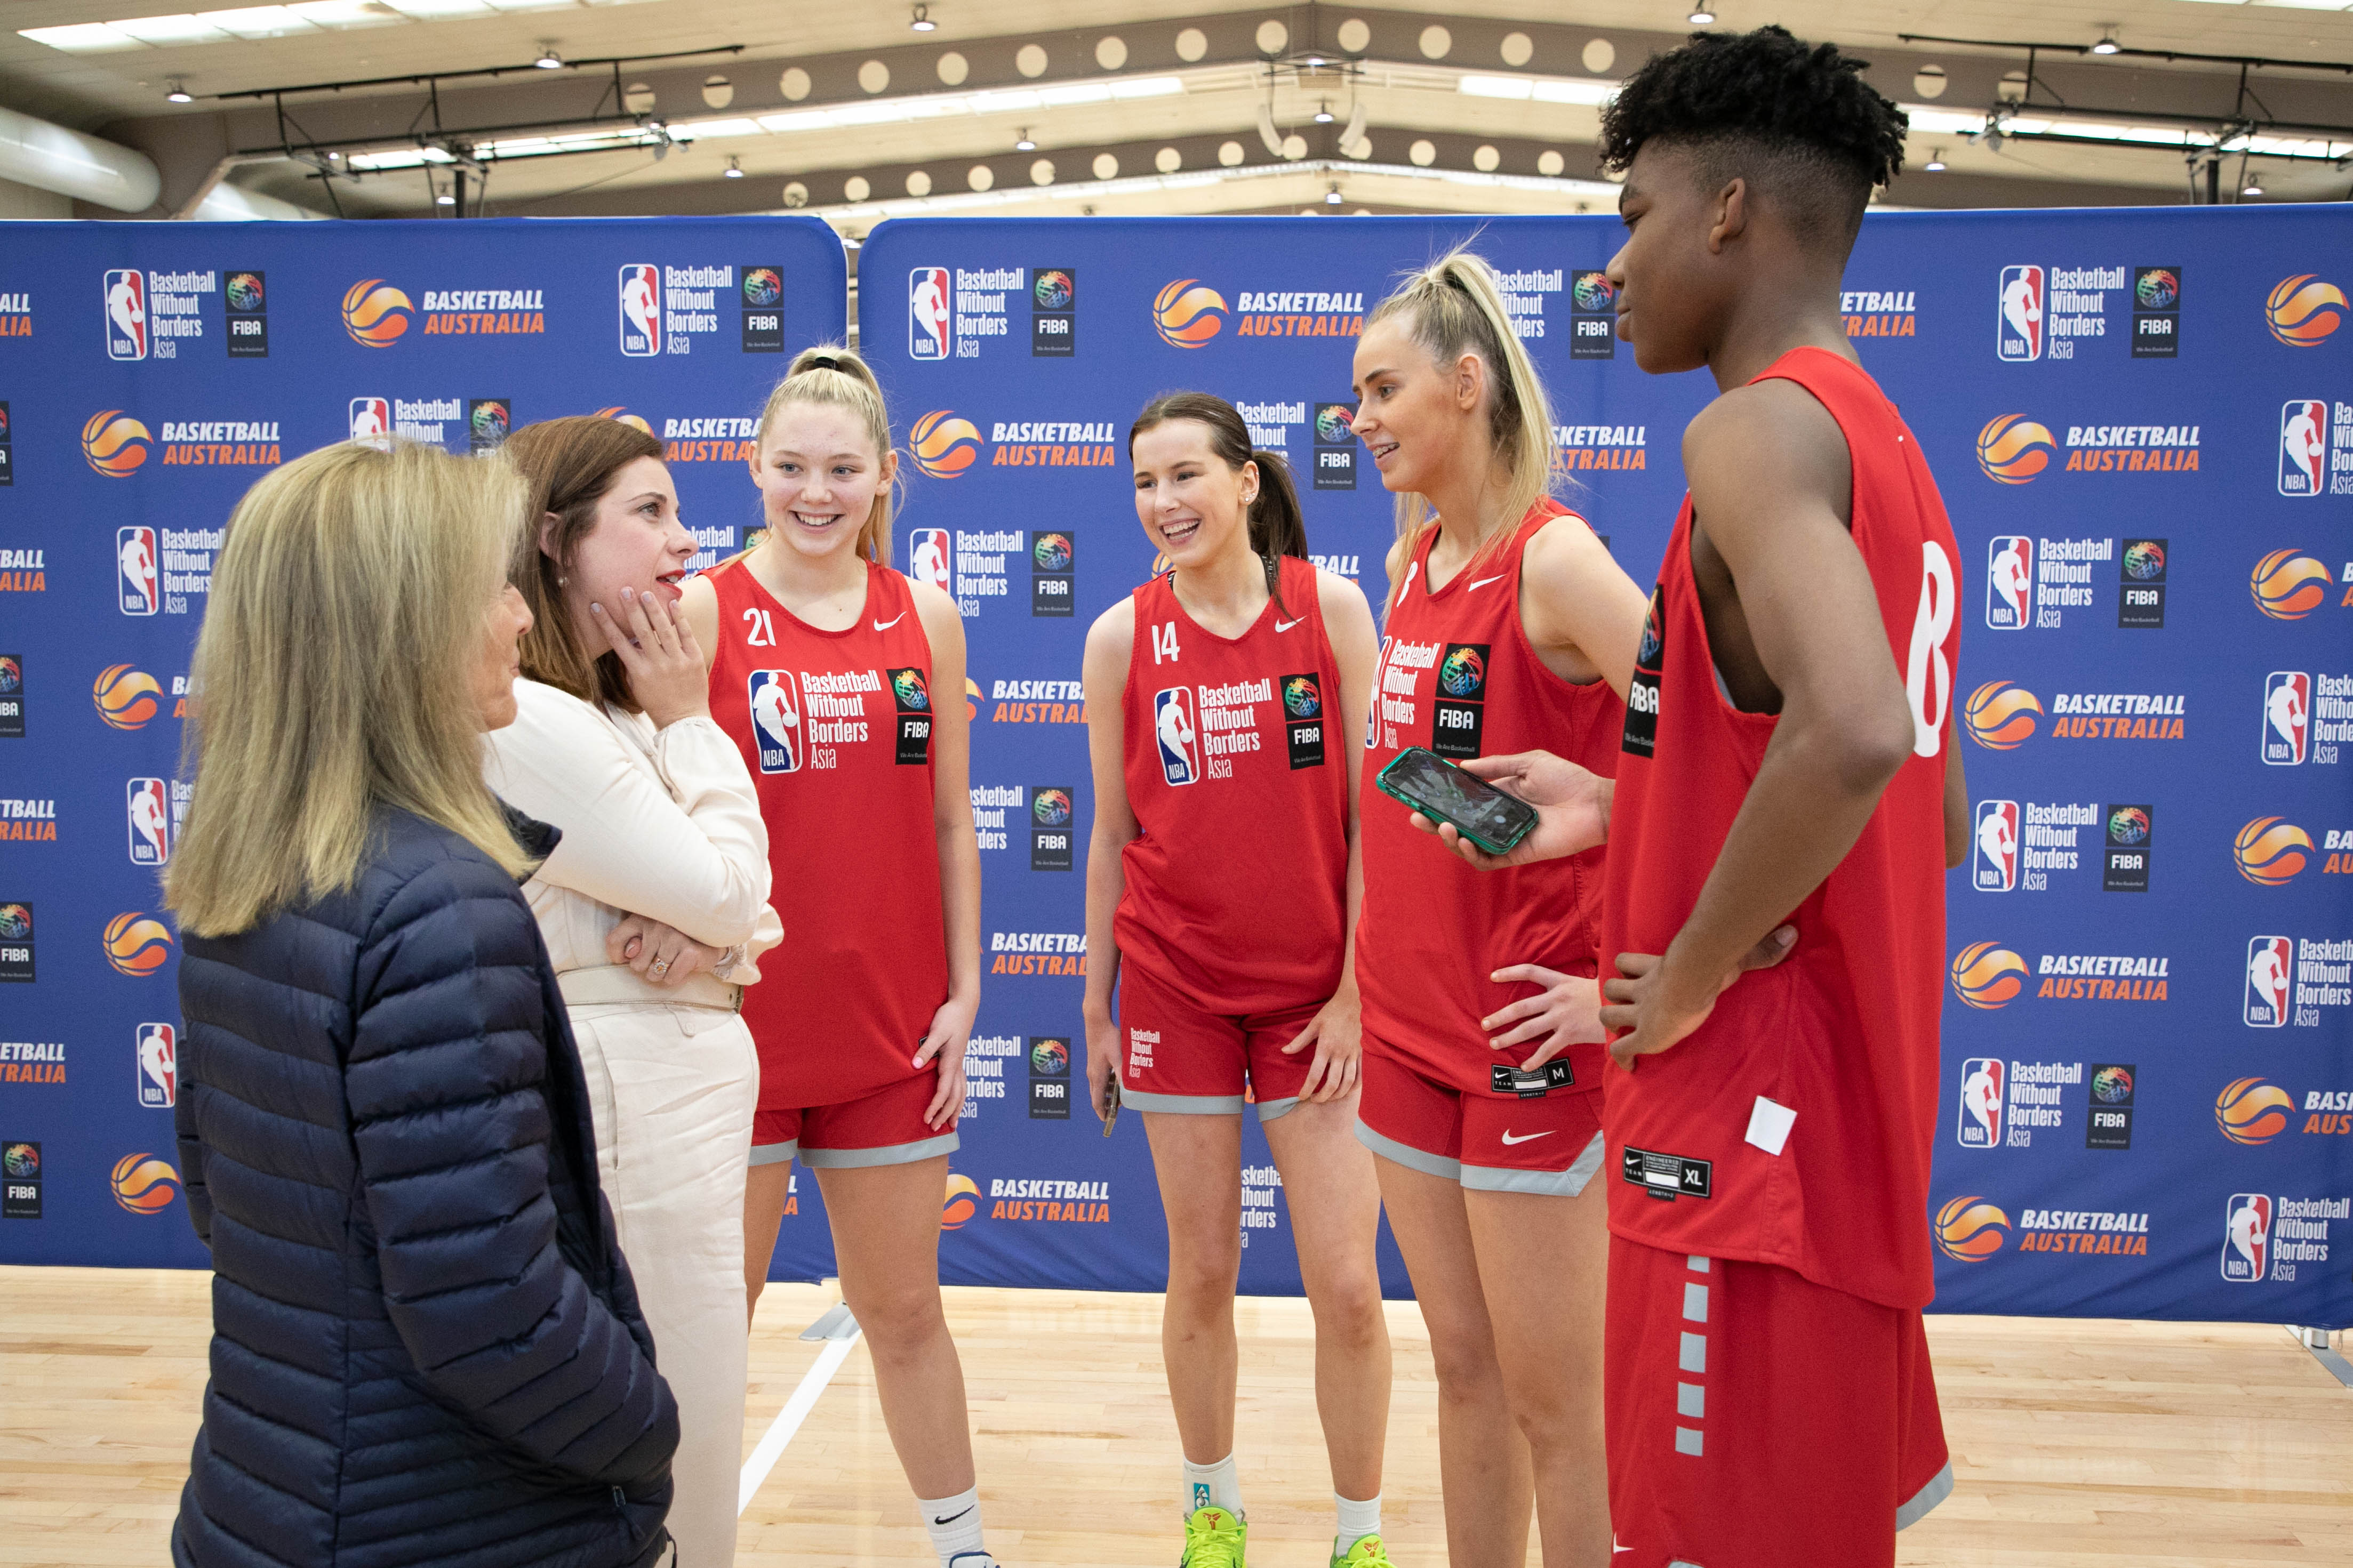 Australia’s Minister for Sport, The Hon. Anika Wells MP, and U.S Ambassador Caroline Kennedy at the 2022 NBA Basketball Without Borders at the Australian Institute of Sport.